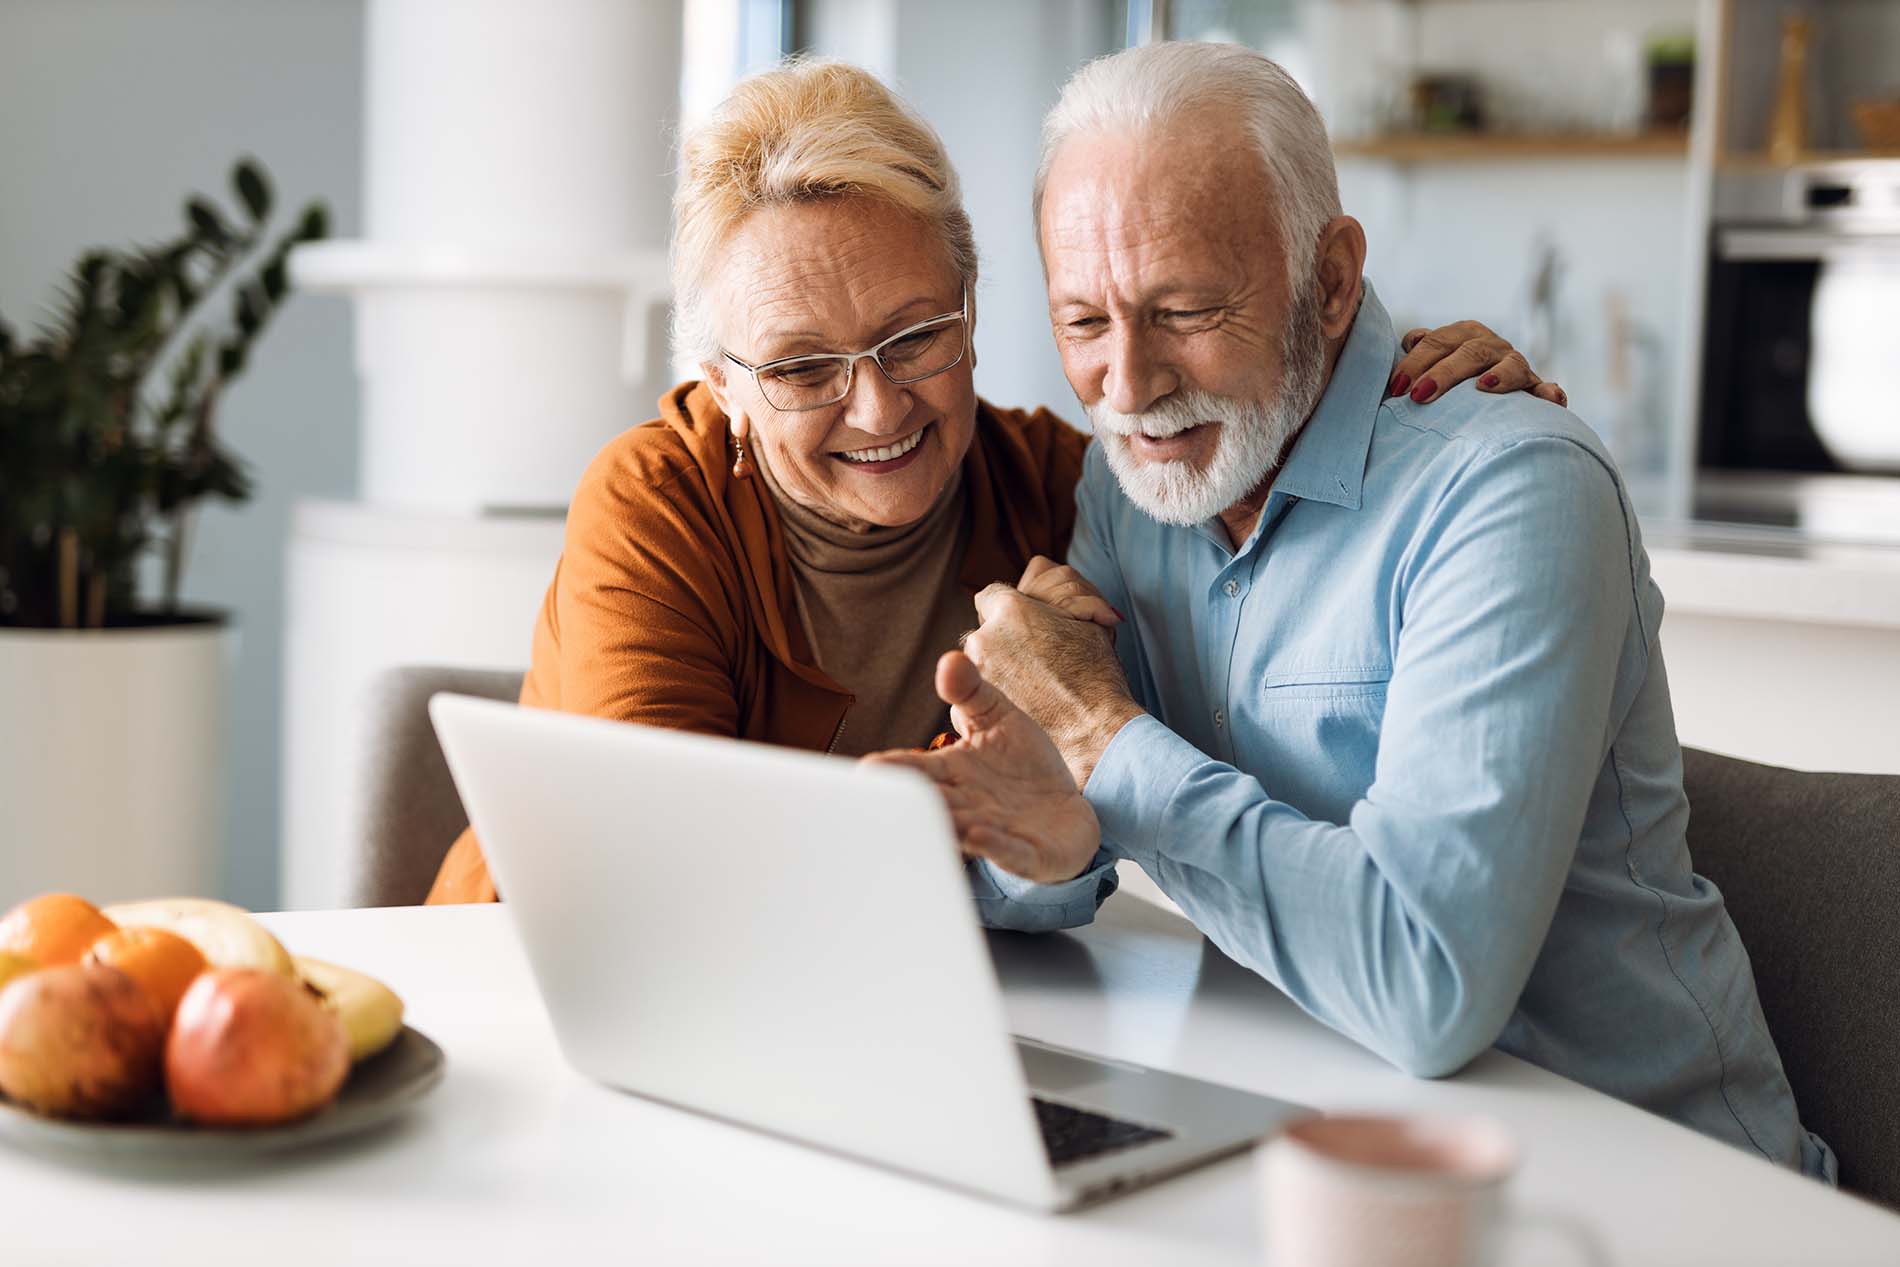 Retirement planning while in retirement